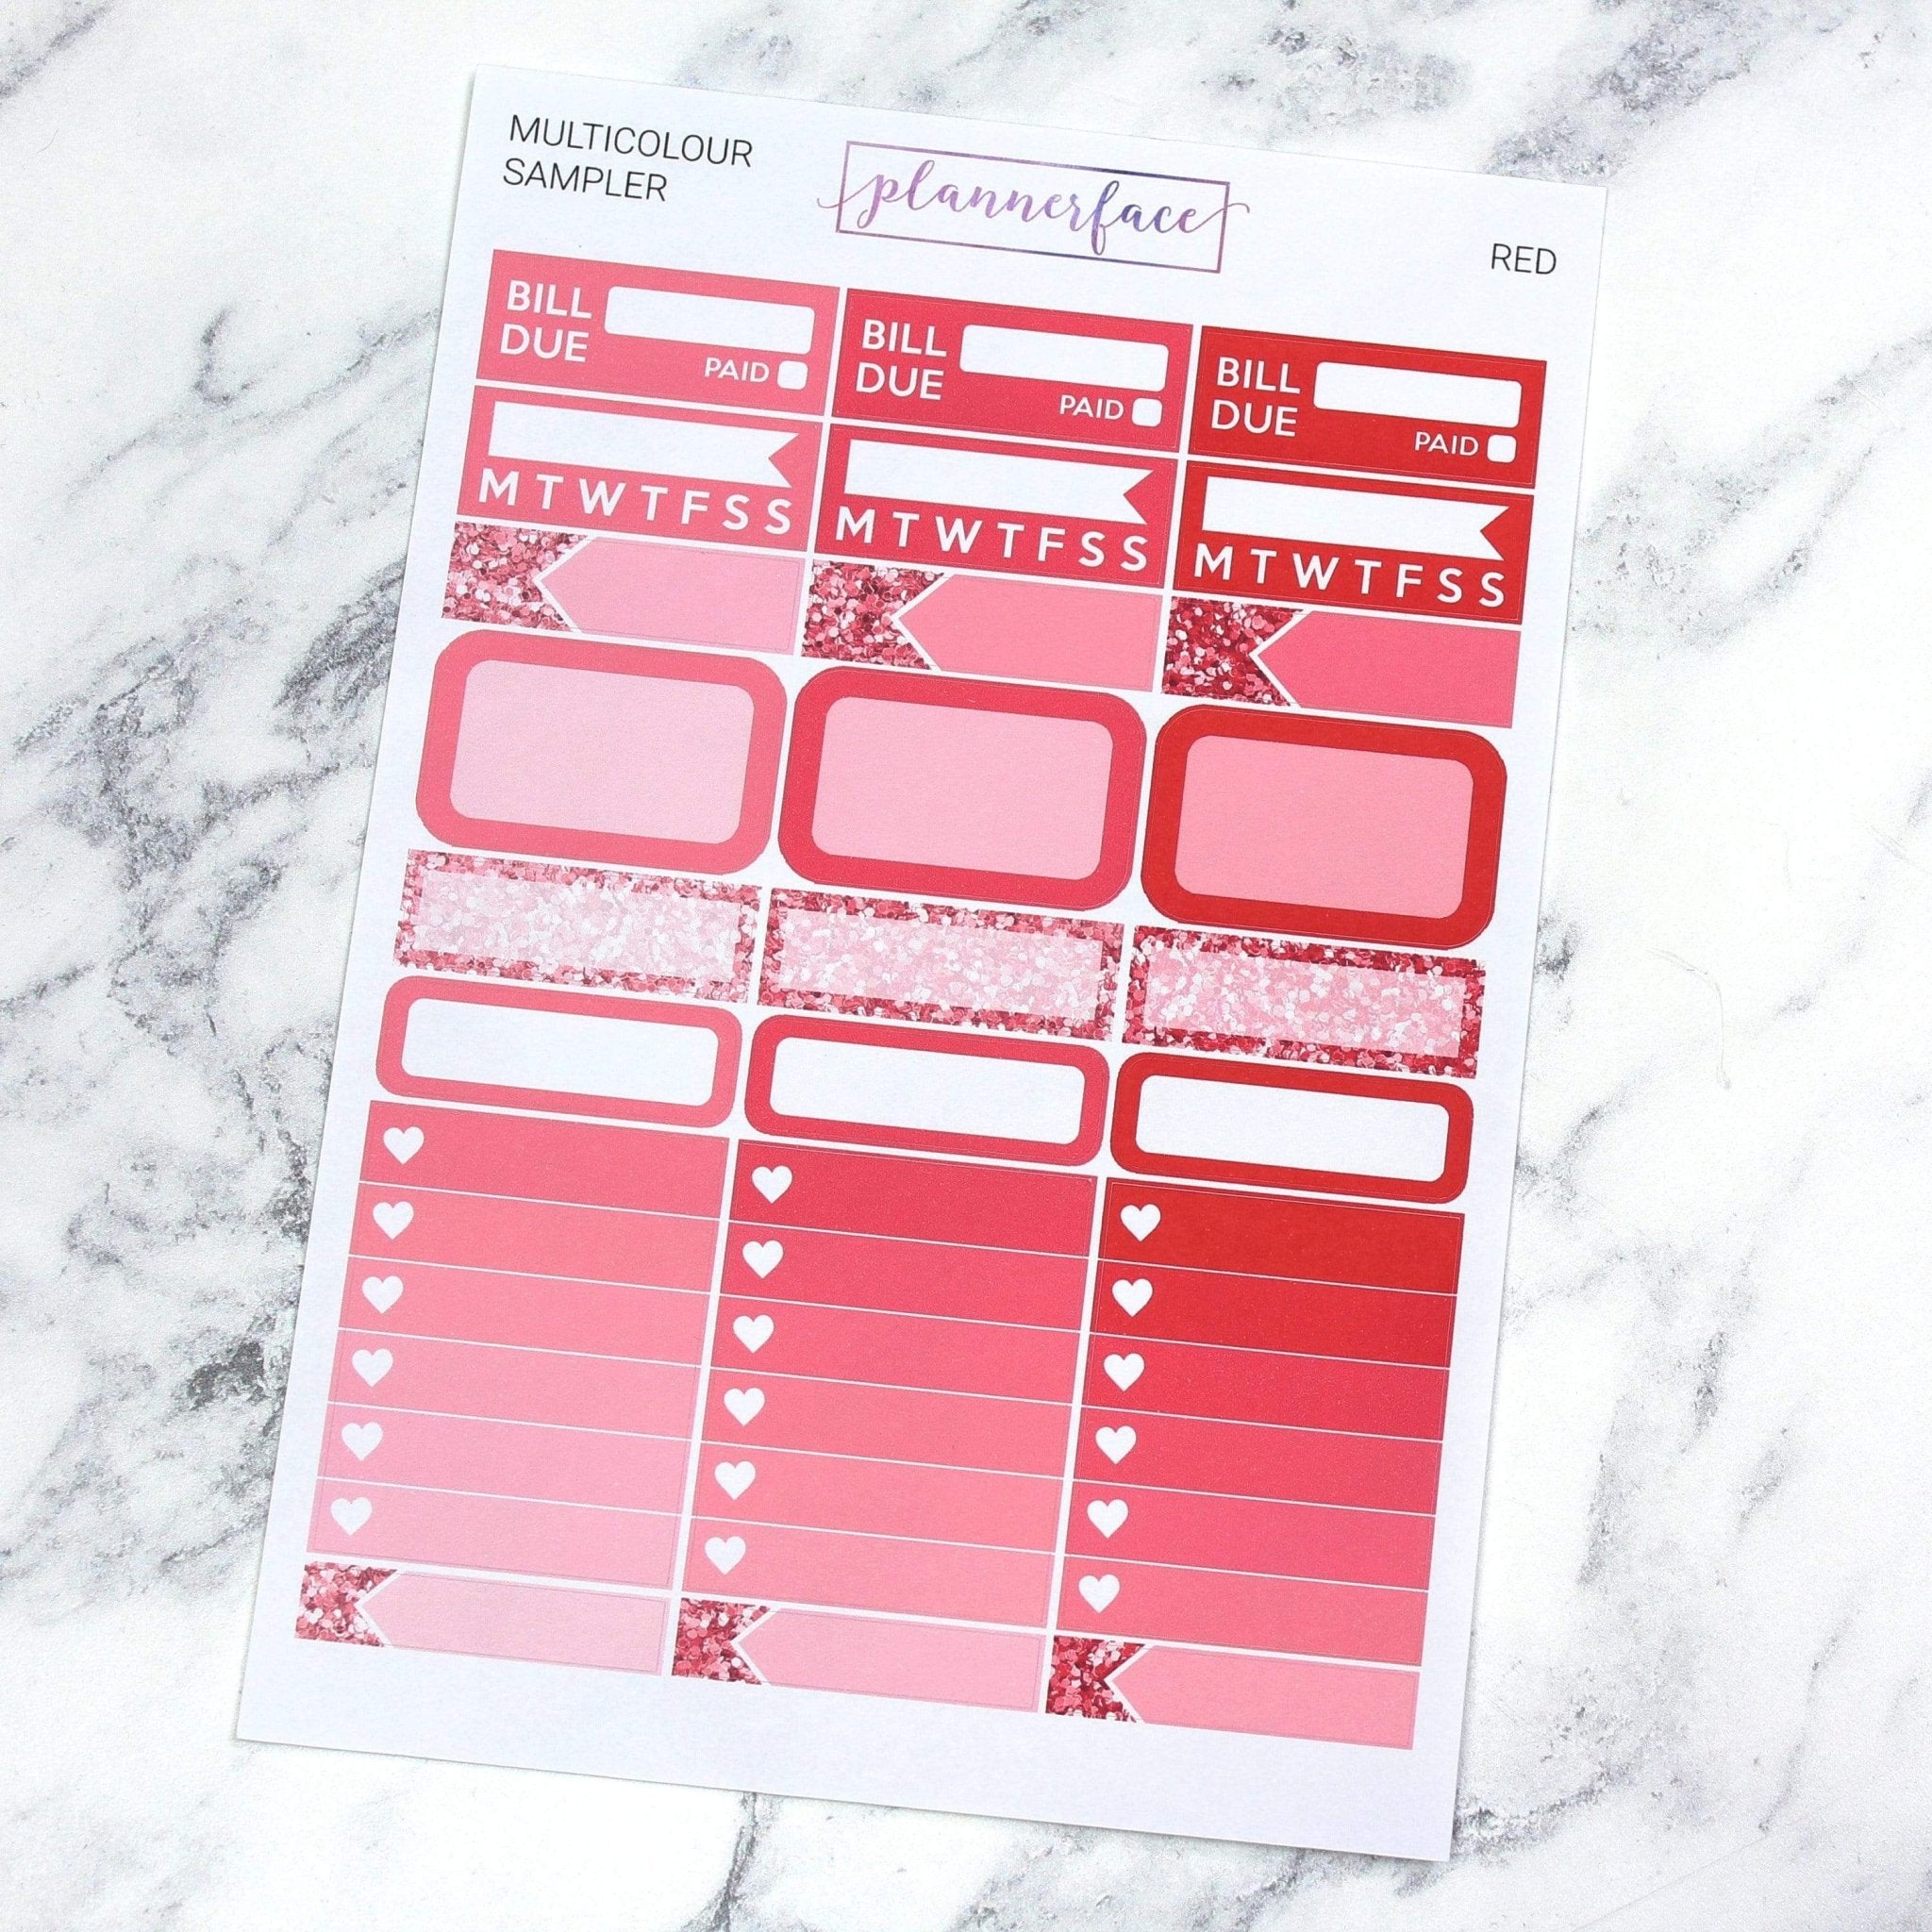 Red Multicolour Sampler by Plannerface